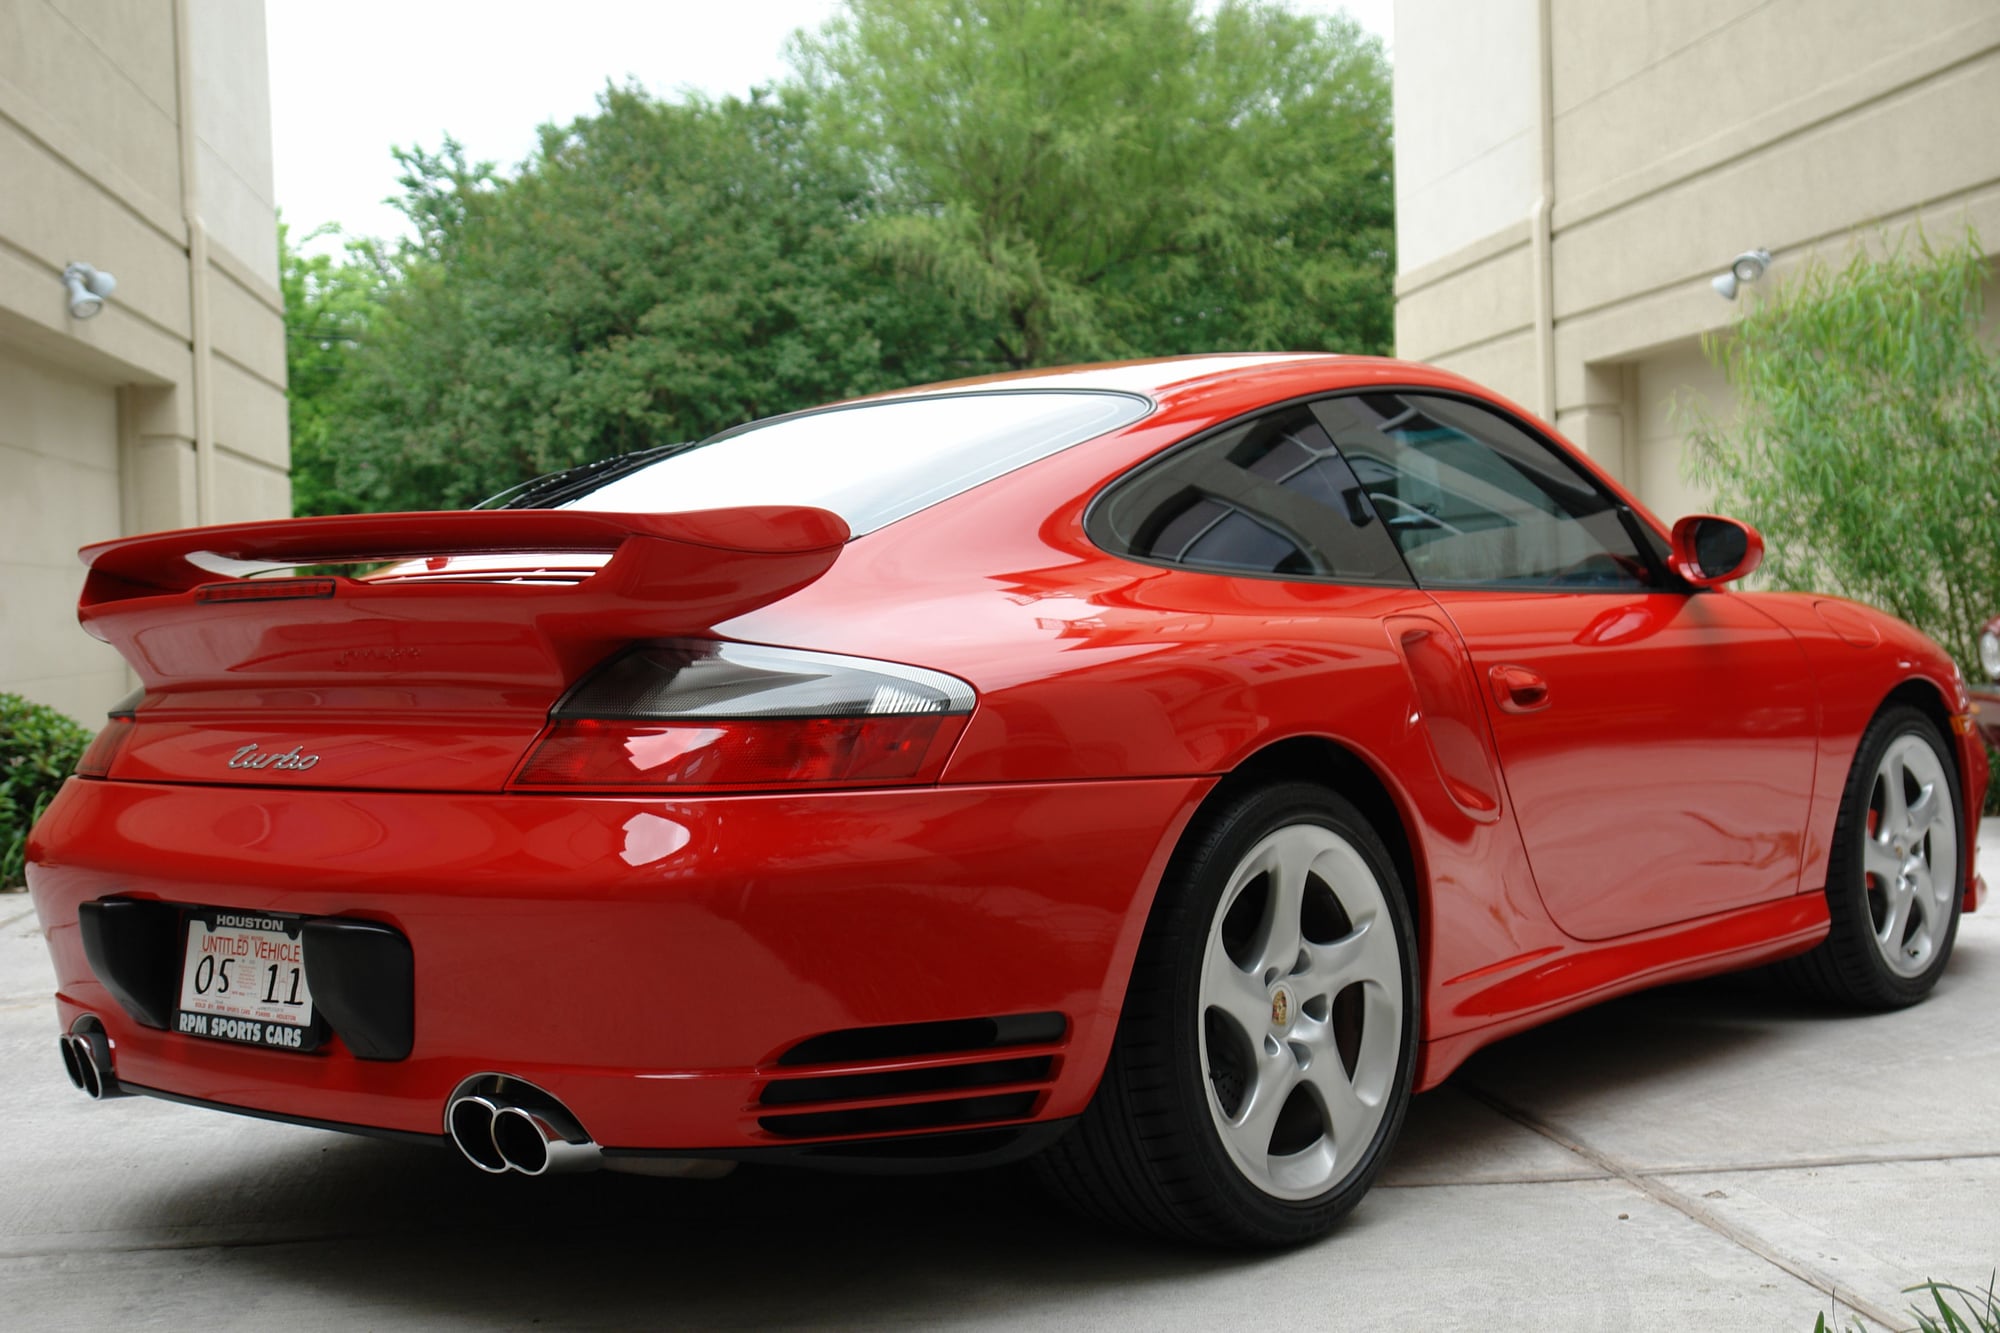 2003 Porsche 911 - Reluctantly parting ways with my low mileage 2003 guards red 996 turbo X50. - Used - VIN WPOAB299135686456 - 26,314 Miles - 6 cyl - 4WD - Manual - Coupe - Red - Gretna, LA 70056, United States